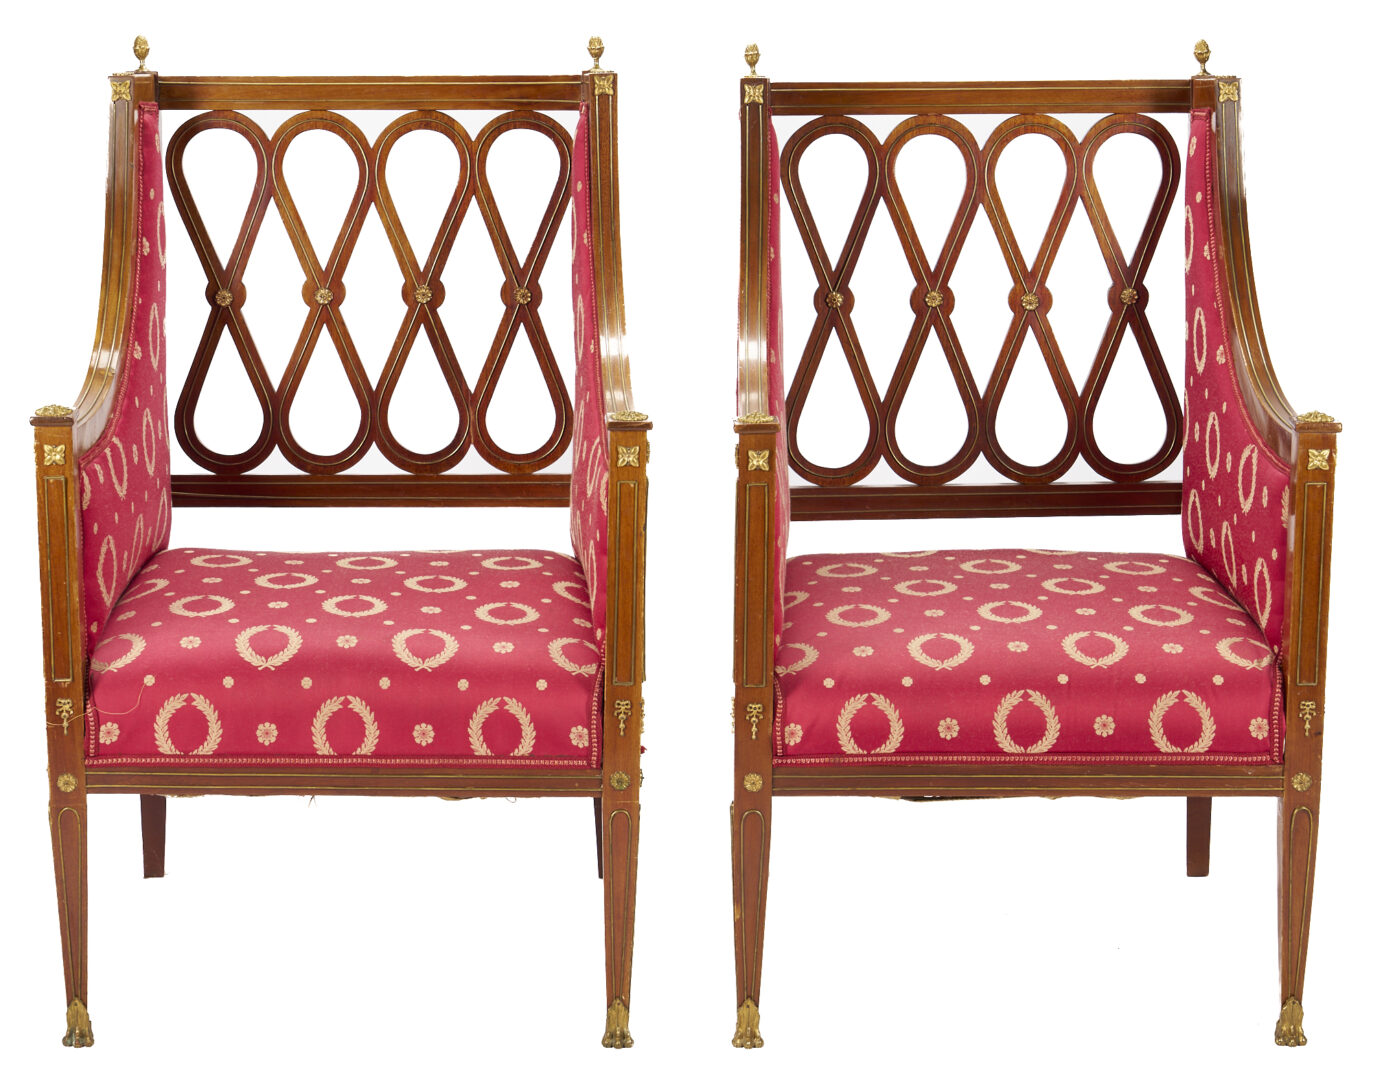 Lot 366: Pair of French Neoclassical Style Baltic BergÃÂ©re Chairs